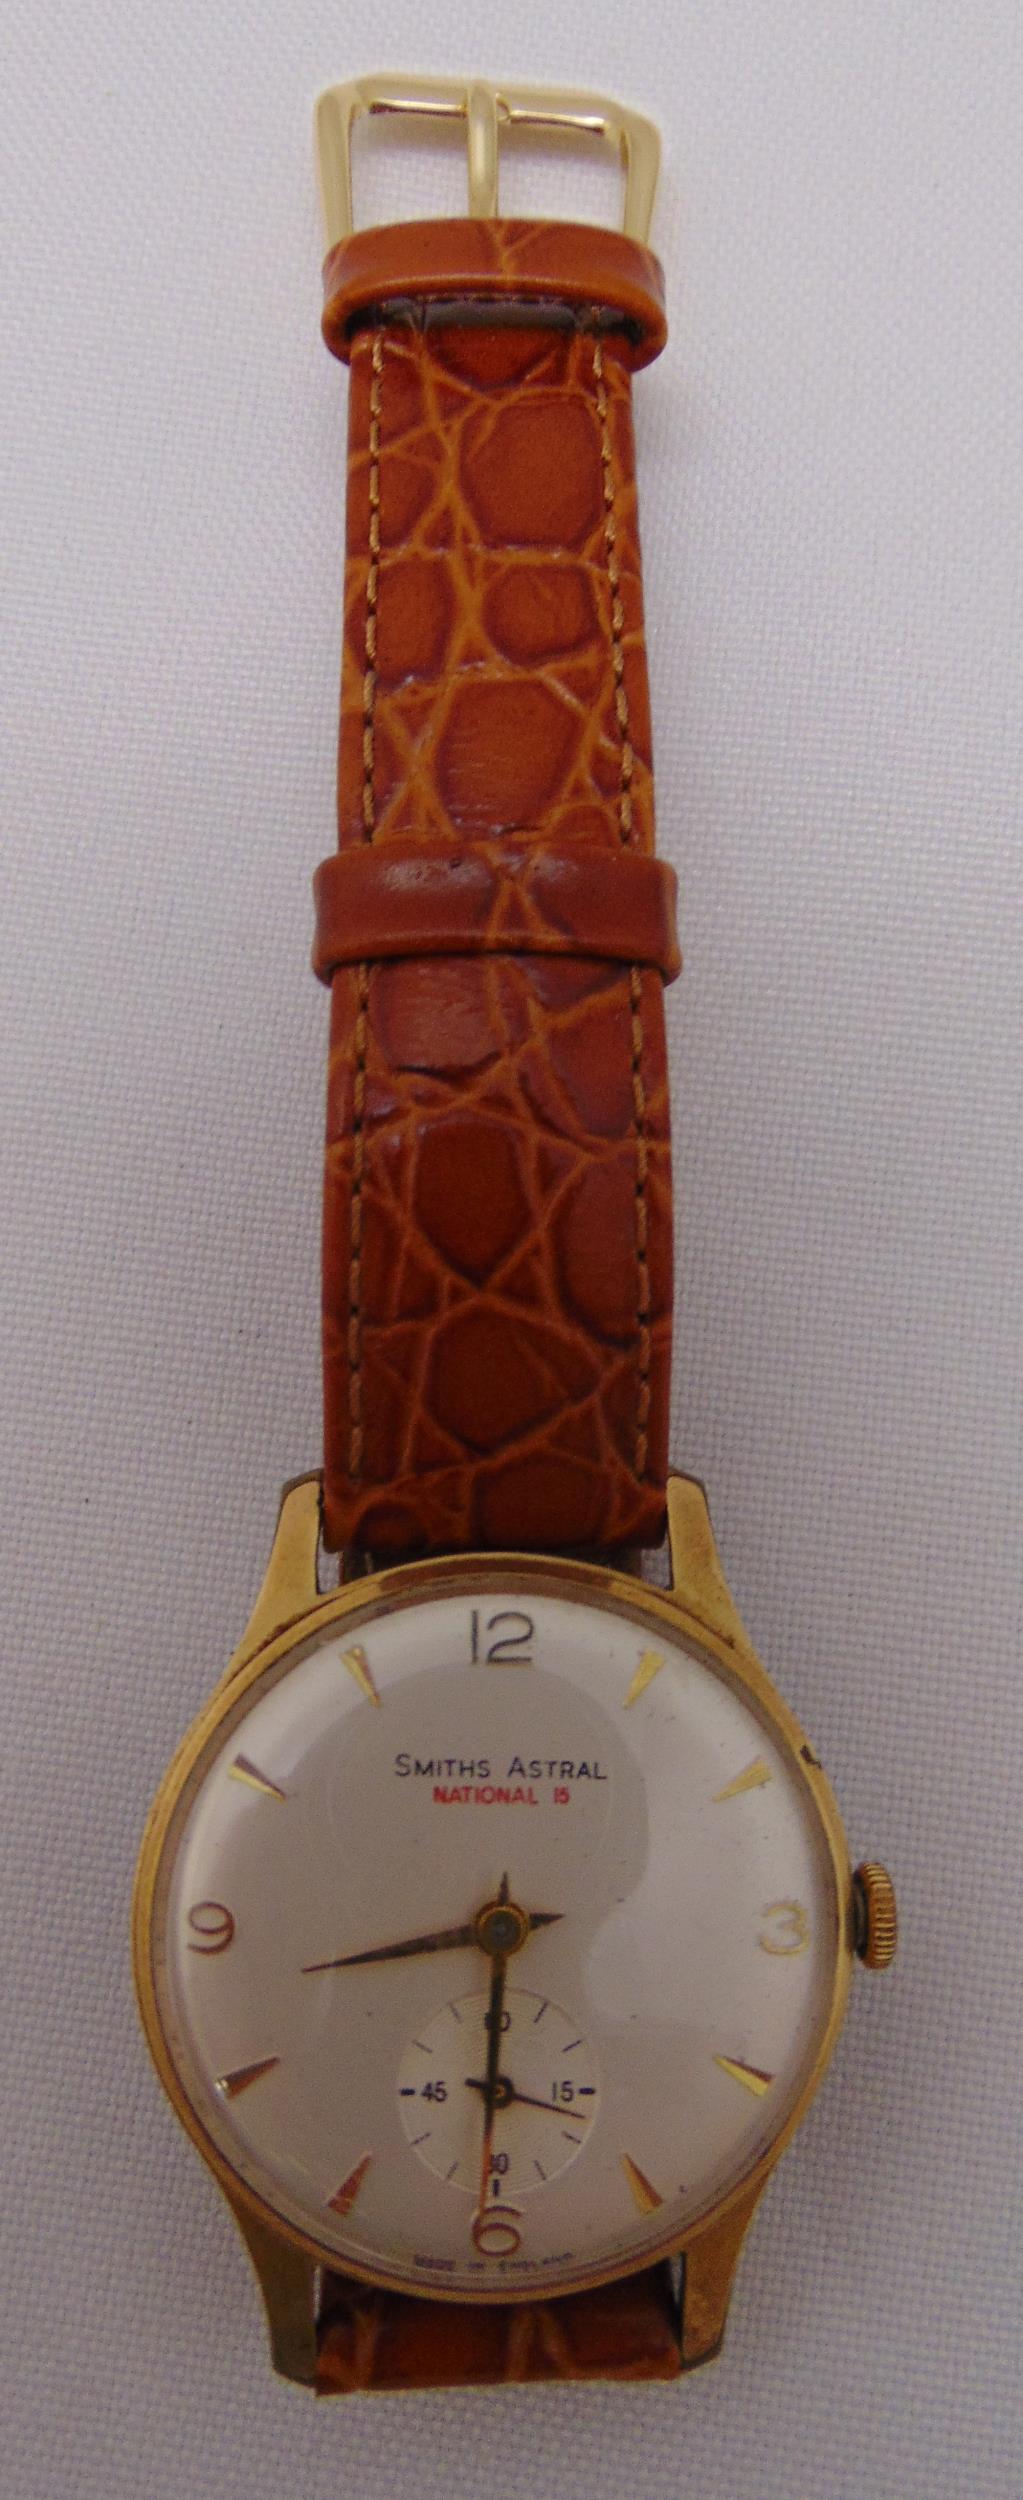 Smiths Astral National 15 gentlemans wristwatch with subsidiary seconds dial on replacement